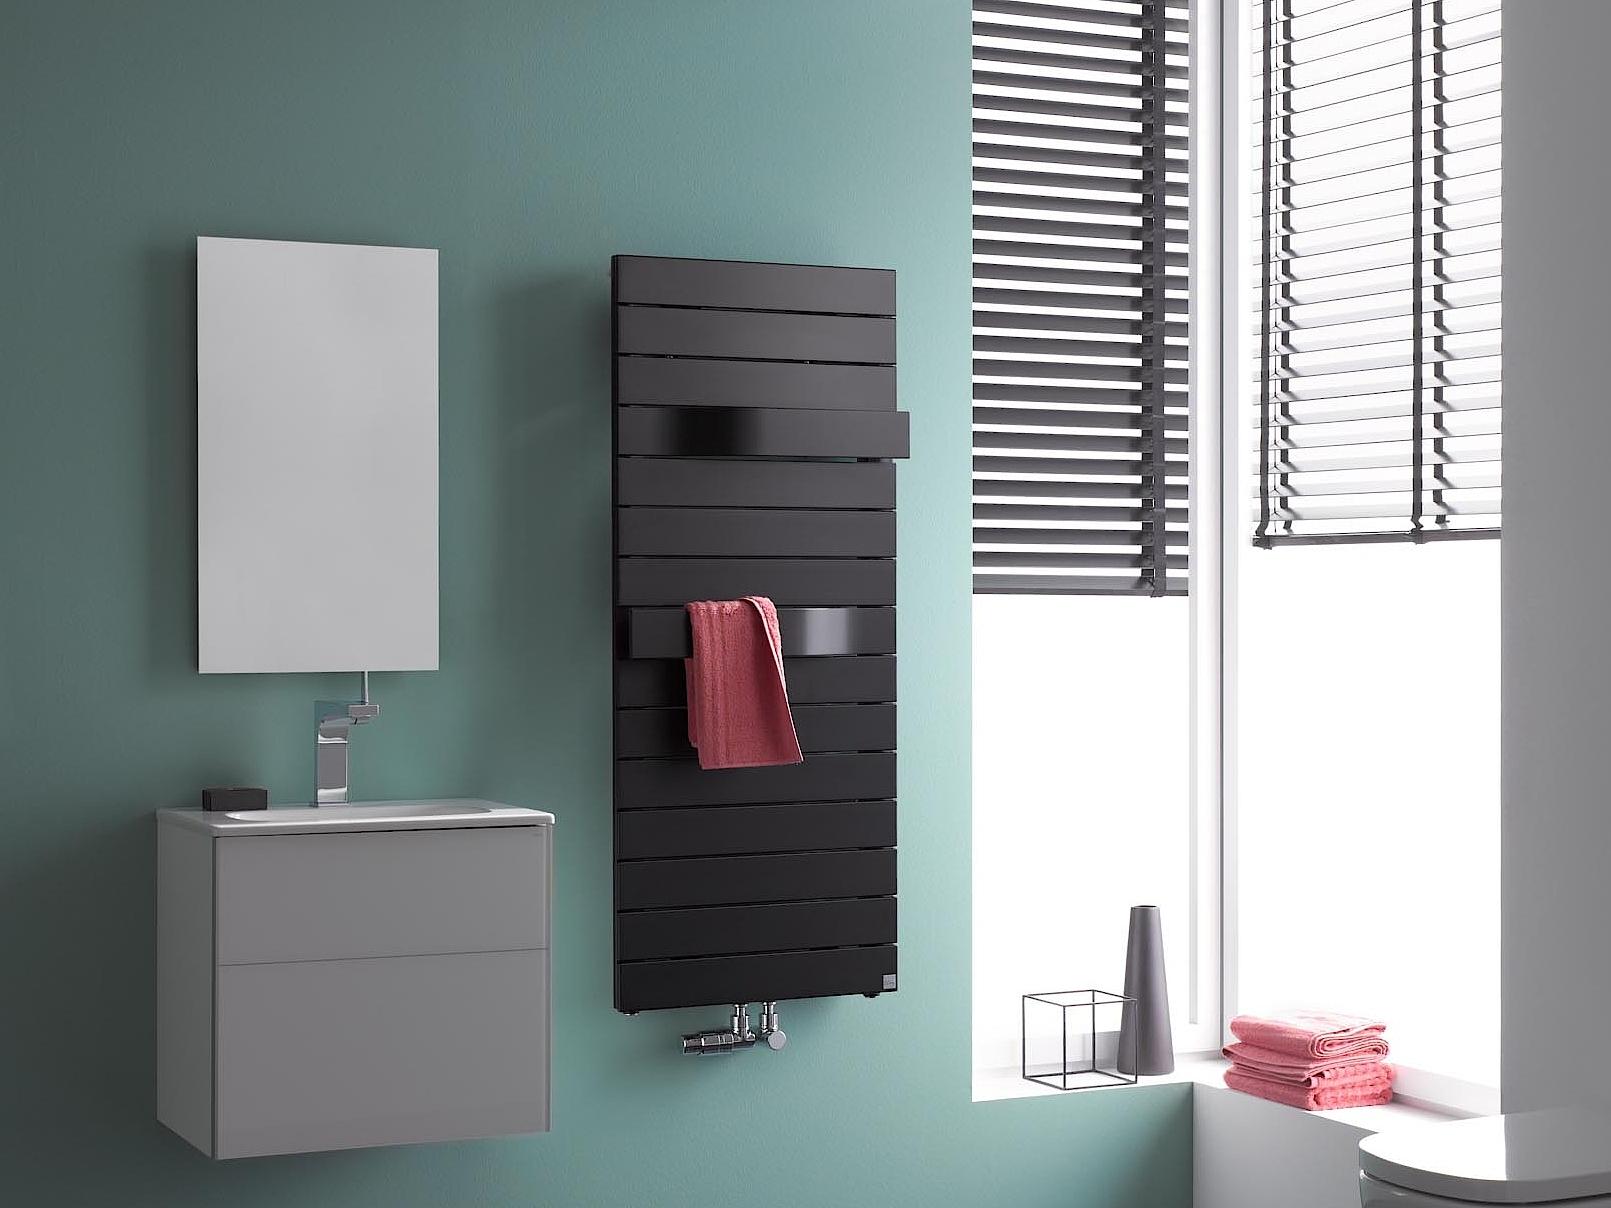 The Kermi Tabeo designer and bathroom radiator is also available in Black.